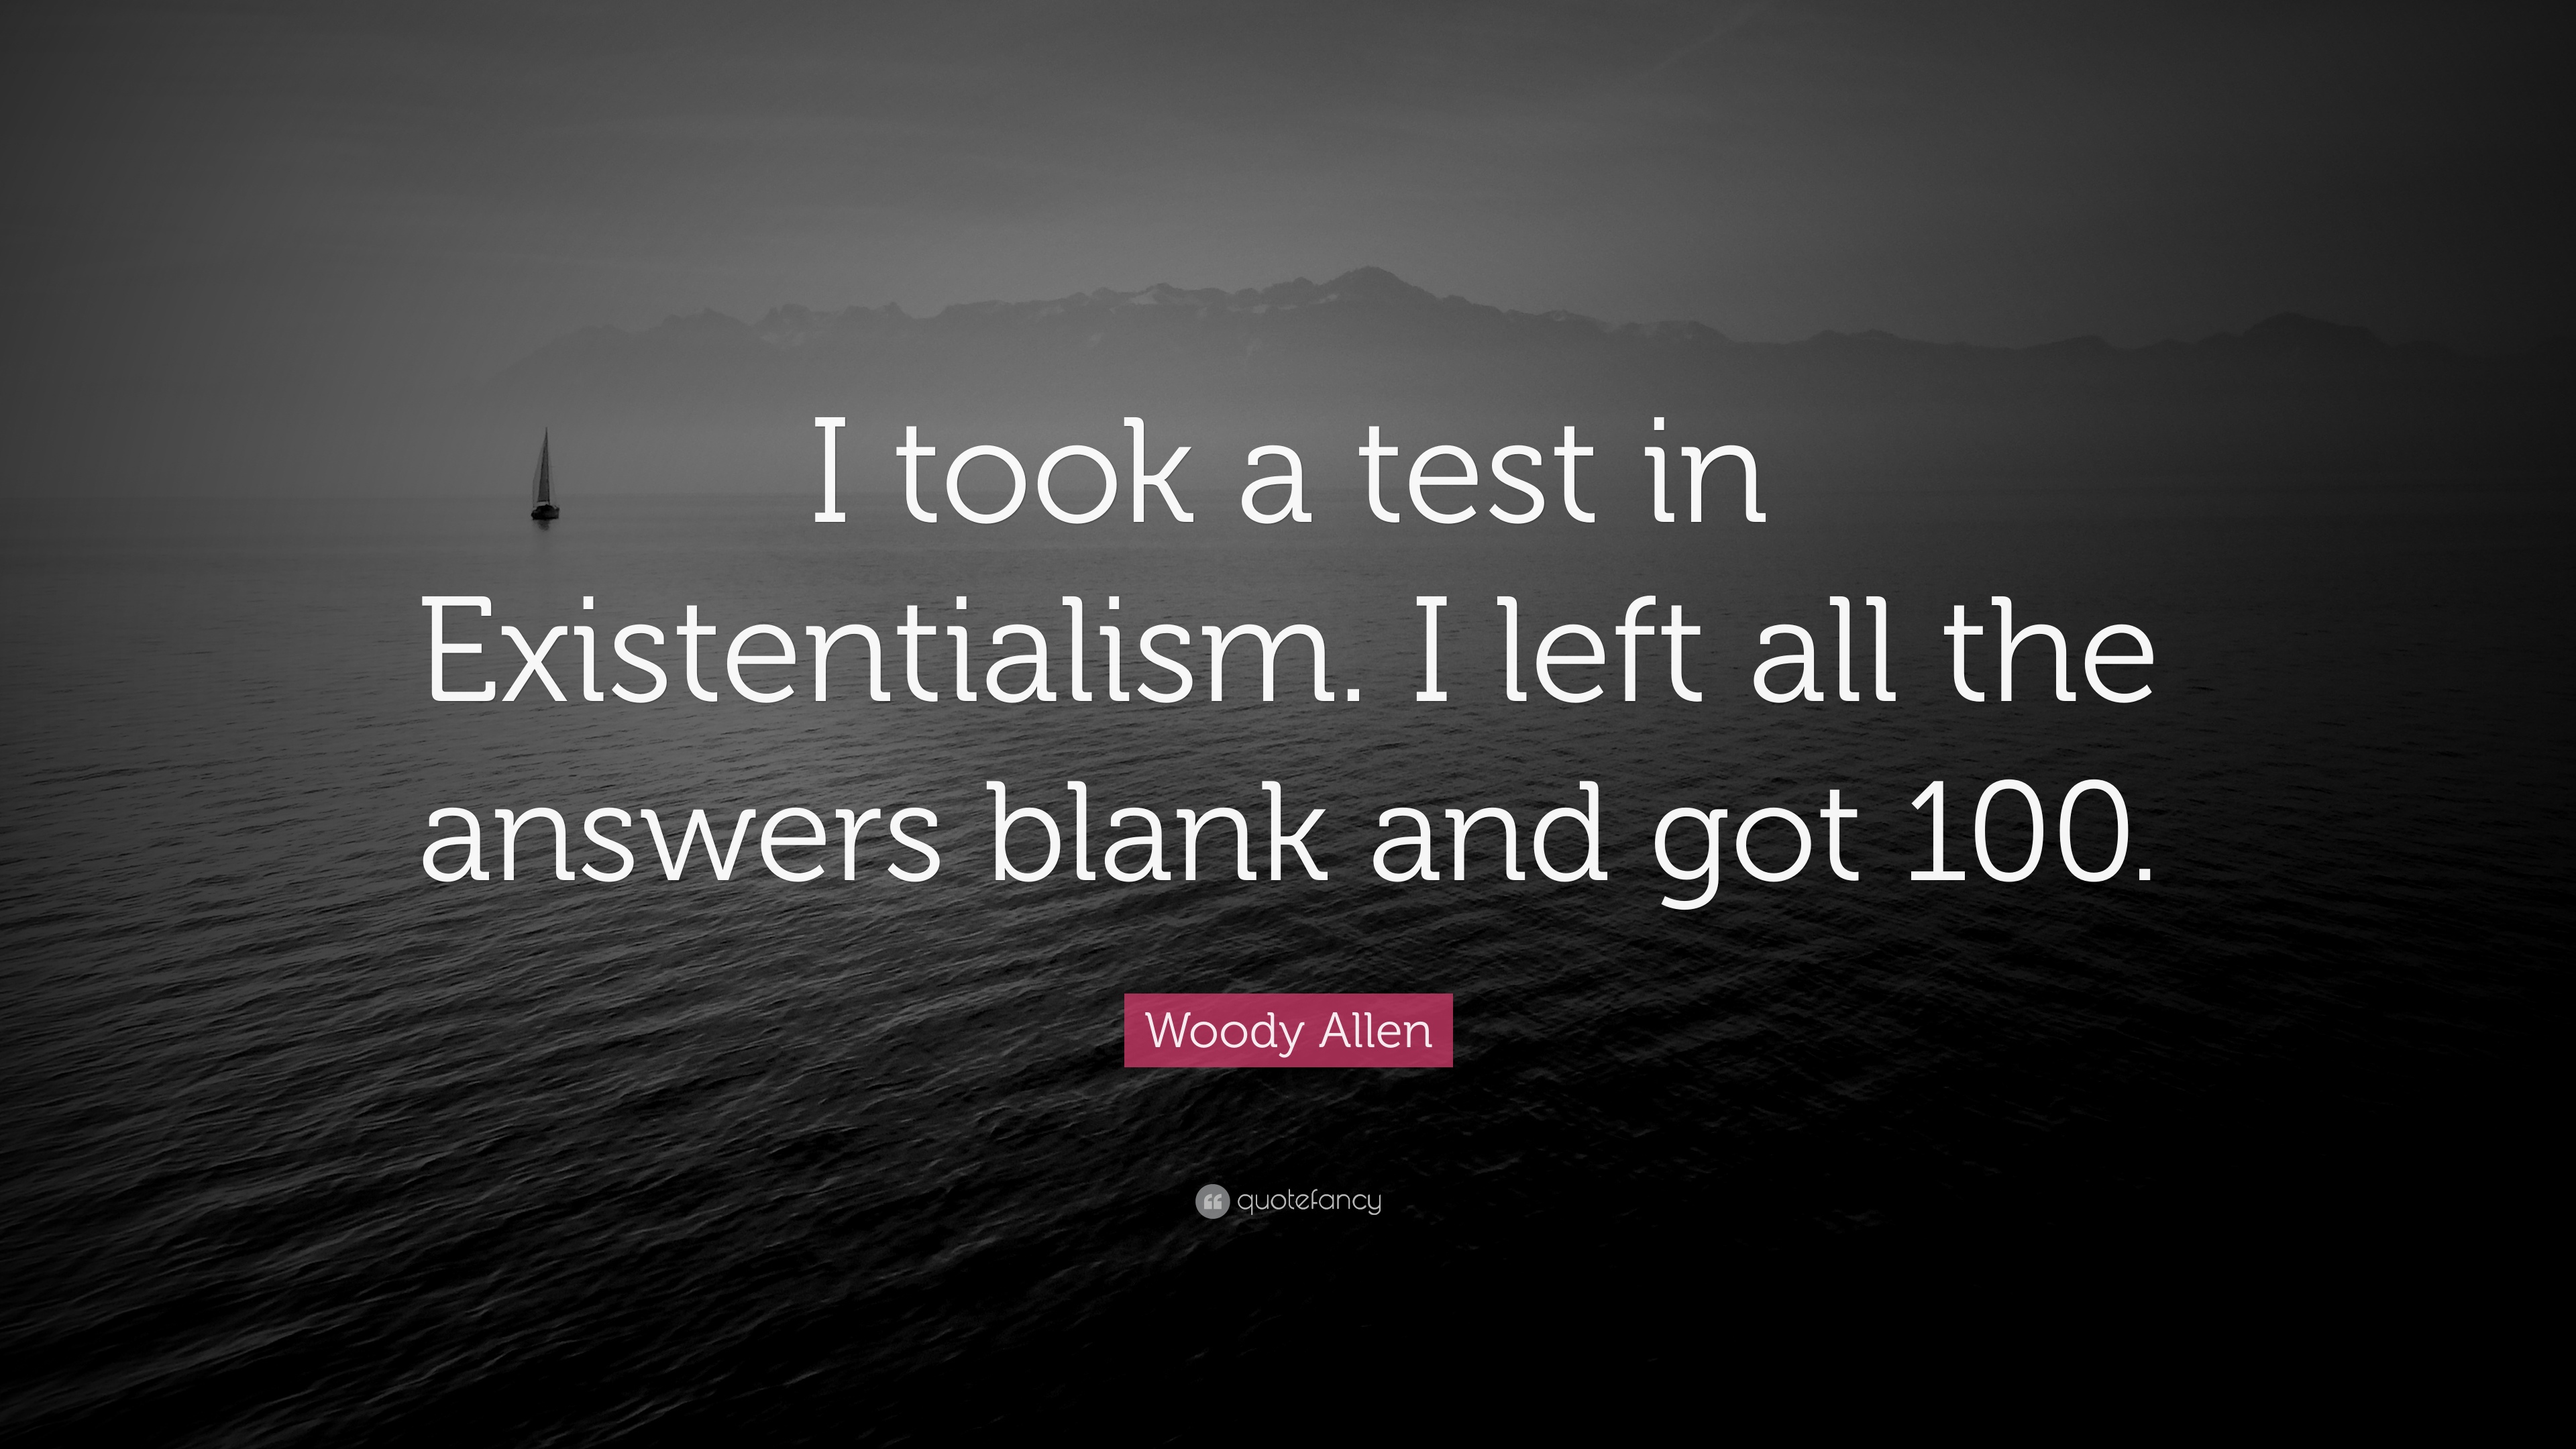 Woody Allen Quote: “I took a test in Existentialism. I left all the answers blank and